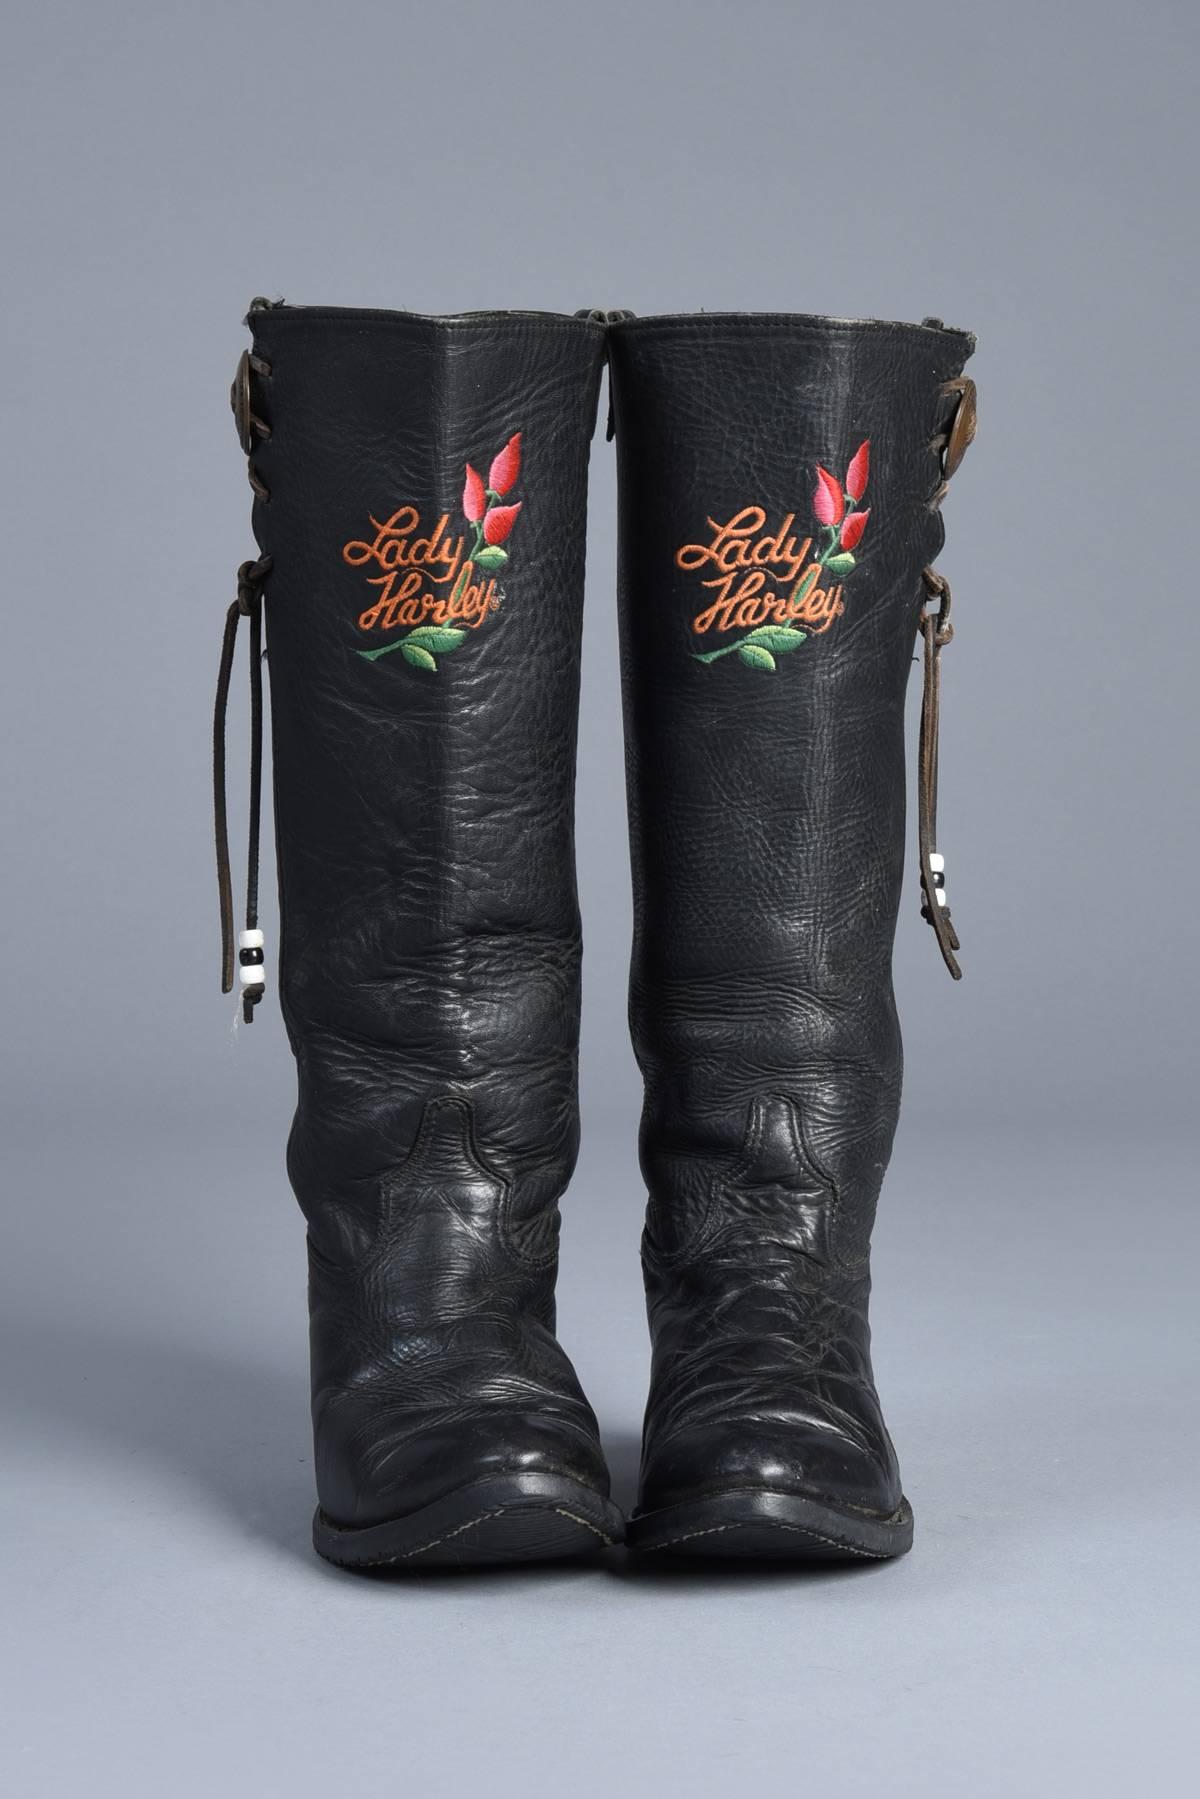 Seriously insane vintage Harley Davidson leather motorcycle boots. Such an amazing piece for the motorcycle riding mama in all of us. Black perfectly worn knee-high boots with pointed toe and cuban heel. The boots feature corseted sides with copper